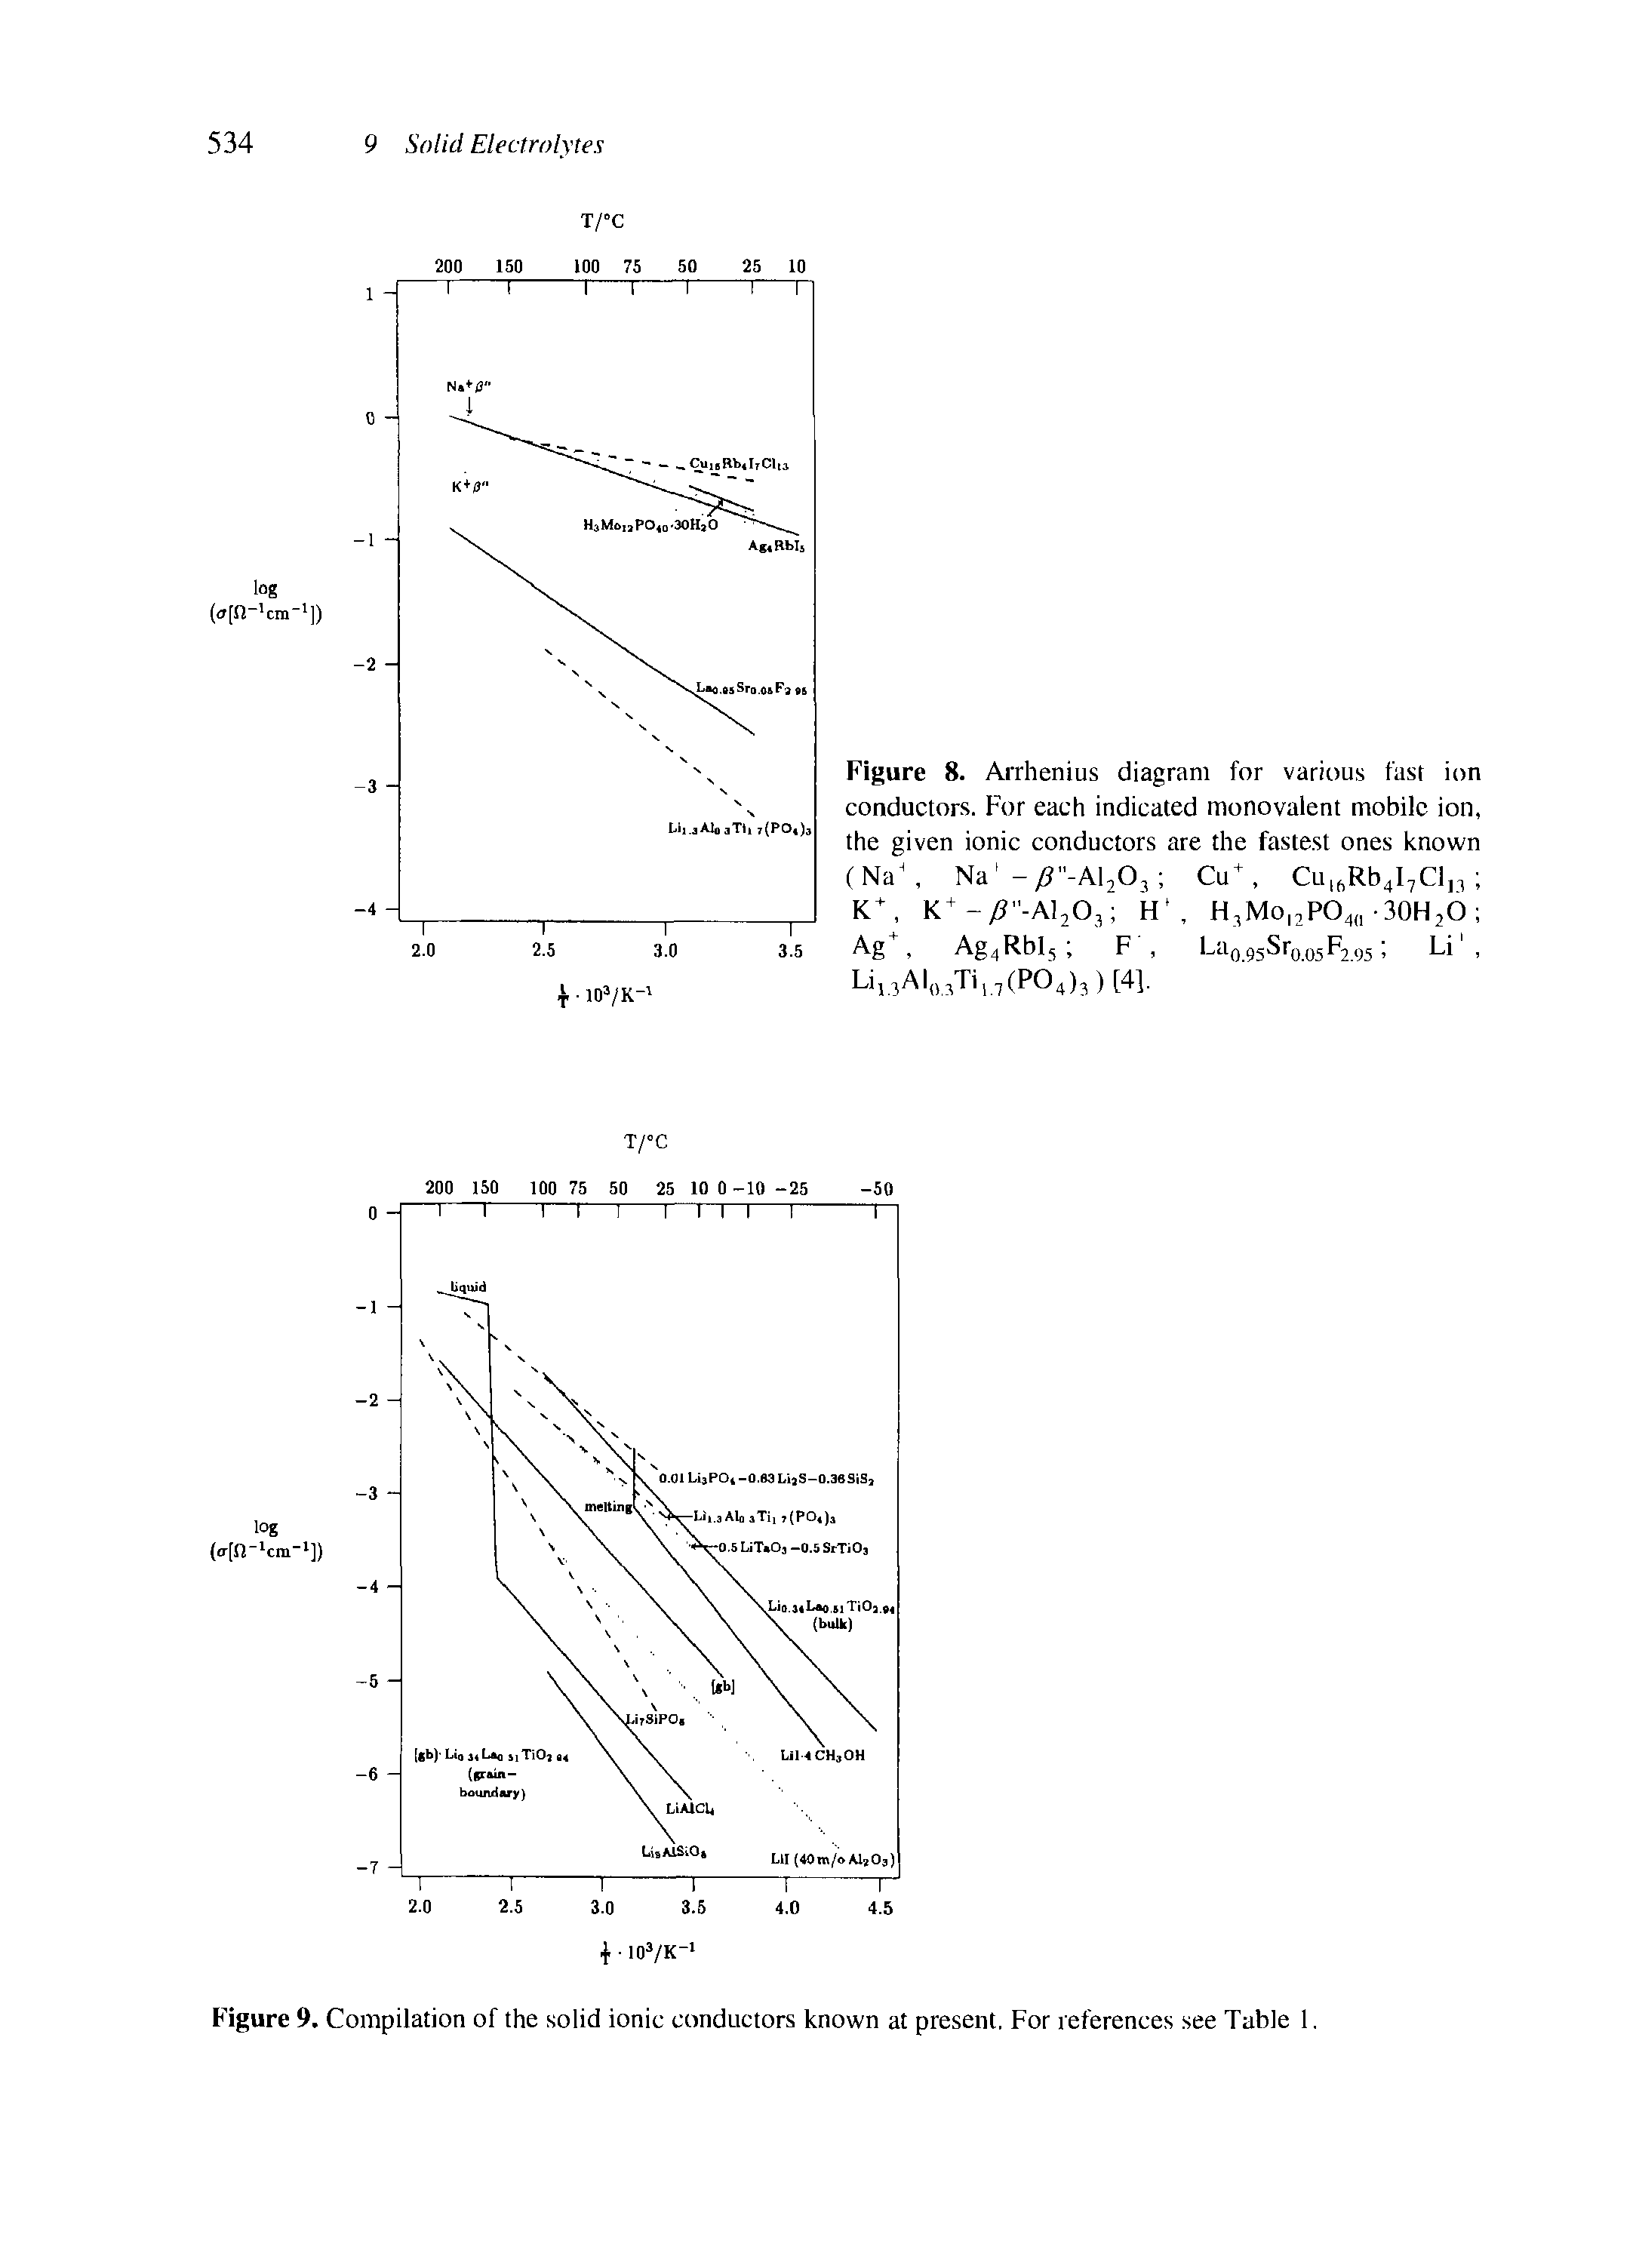 Figure 8. Arrhenius diagram for various fast ion conductors. For each indicated monovalent mobile ion, the given ionic conductors are the fastest ones known (Na Na 1 - / "-Al203 Cu+, CulflRb4I7Cll3 K+, K+-/T-A120, H H3Moi2P04(, -30H2O Ag, Ag Rbls F, La0 95Sr005F295 Li, ...